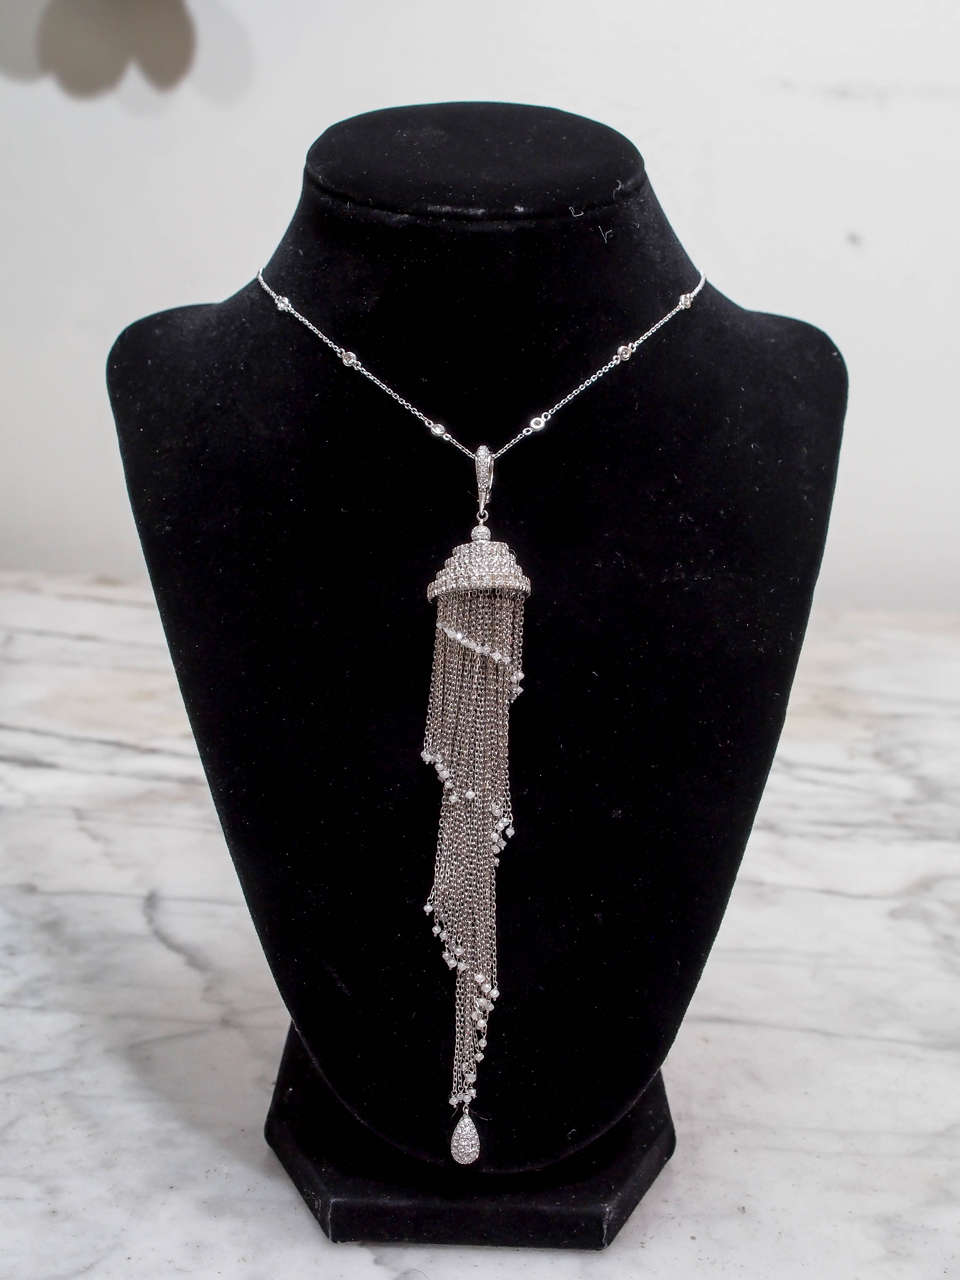 Magnificent Diamond Tassel by Mariani. The top of the  tassel is entirely pavèd with D,E,F colored, VS diamonds. The tassel is made up of chains with diamond beads and a pavè diamond drop on the bottom  There are approximately 19.00cts of diamonds.